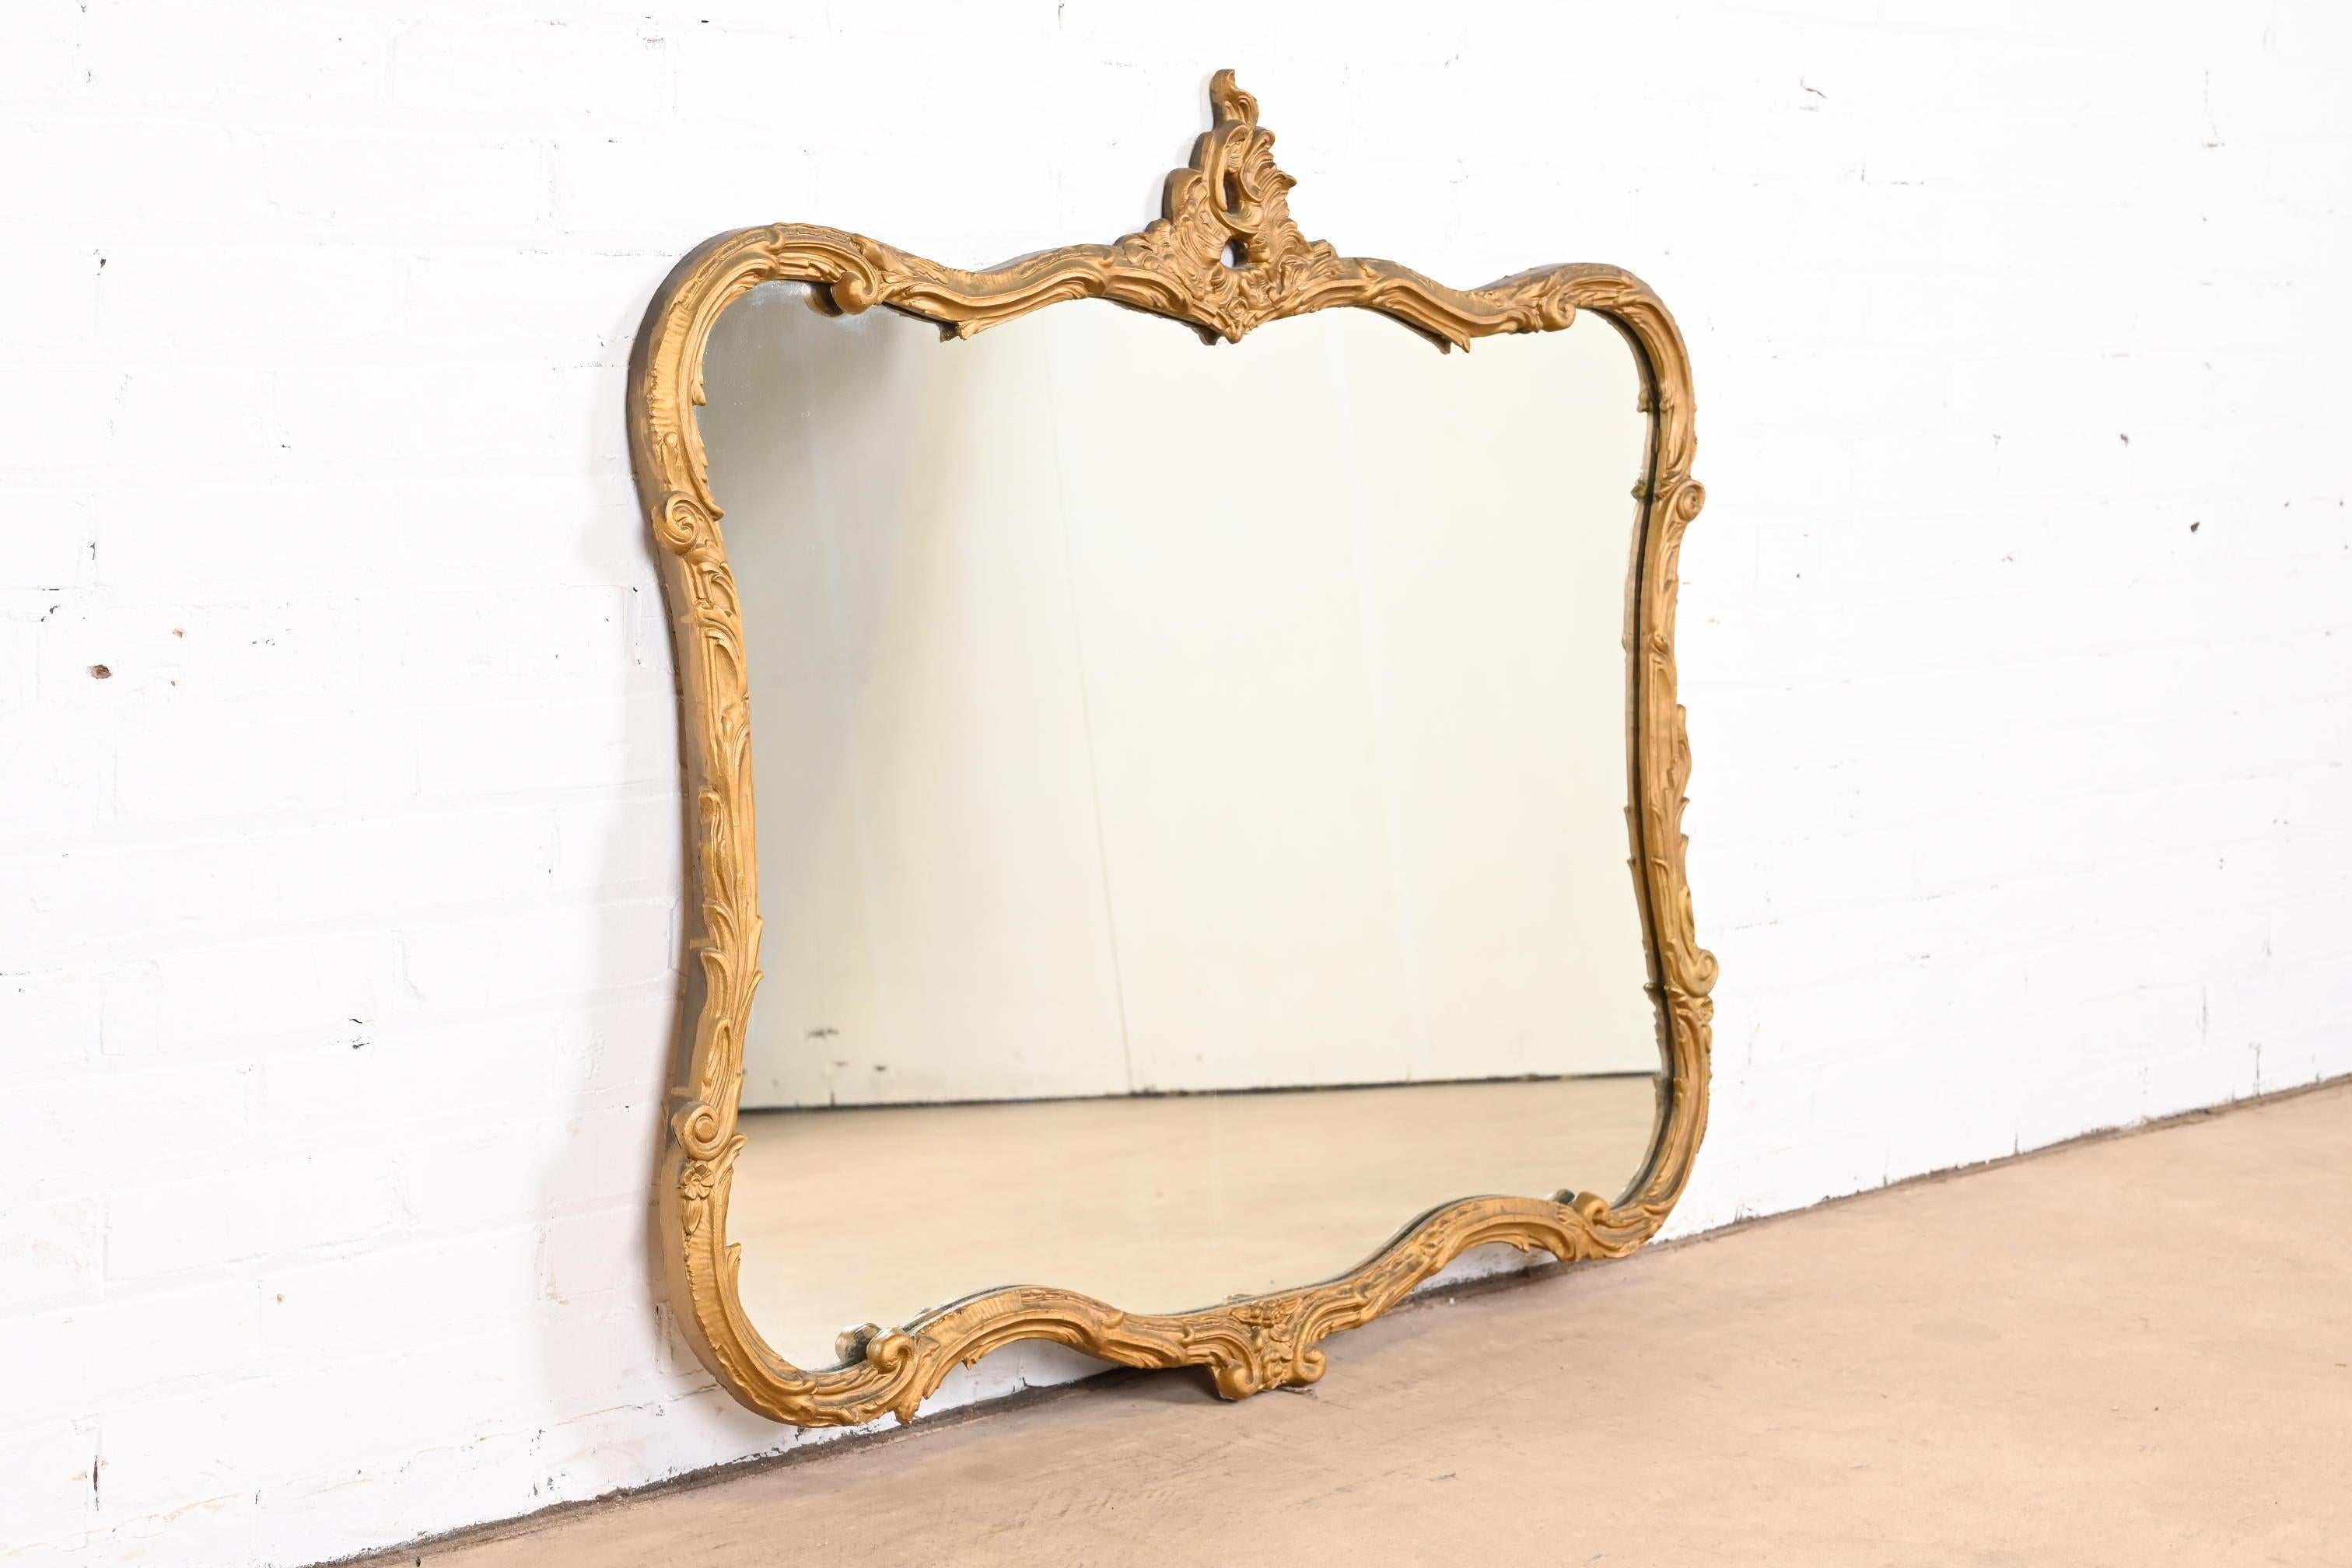 A gorgeous vintage Louis XV French Rococo style carved giltwood framed wall mirror

Early 20th Century

Measures: 42